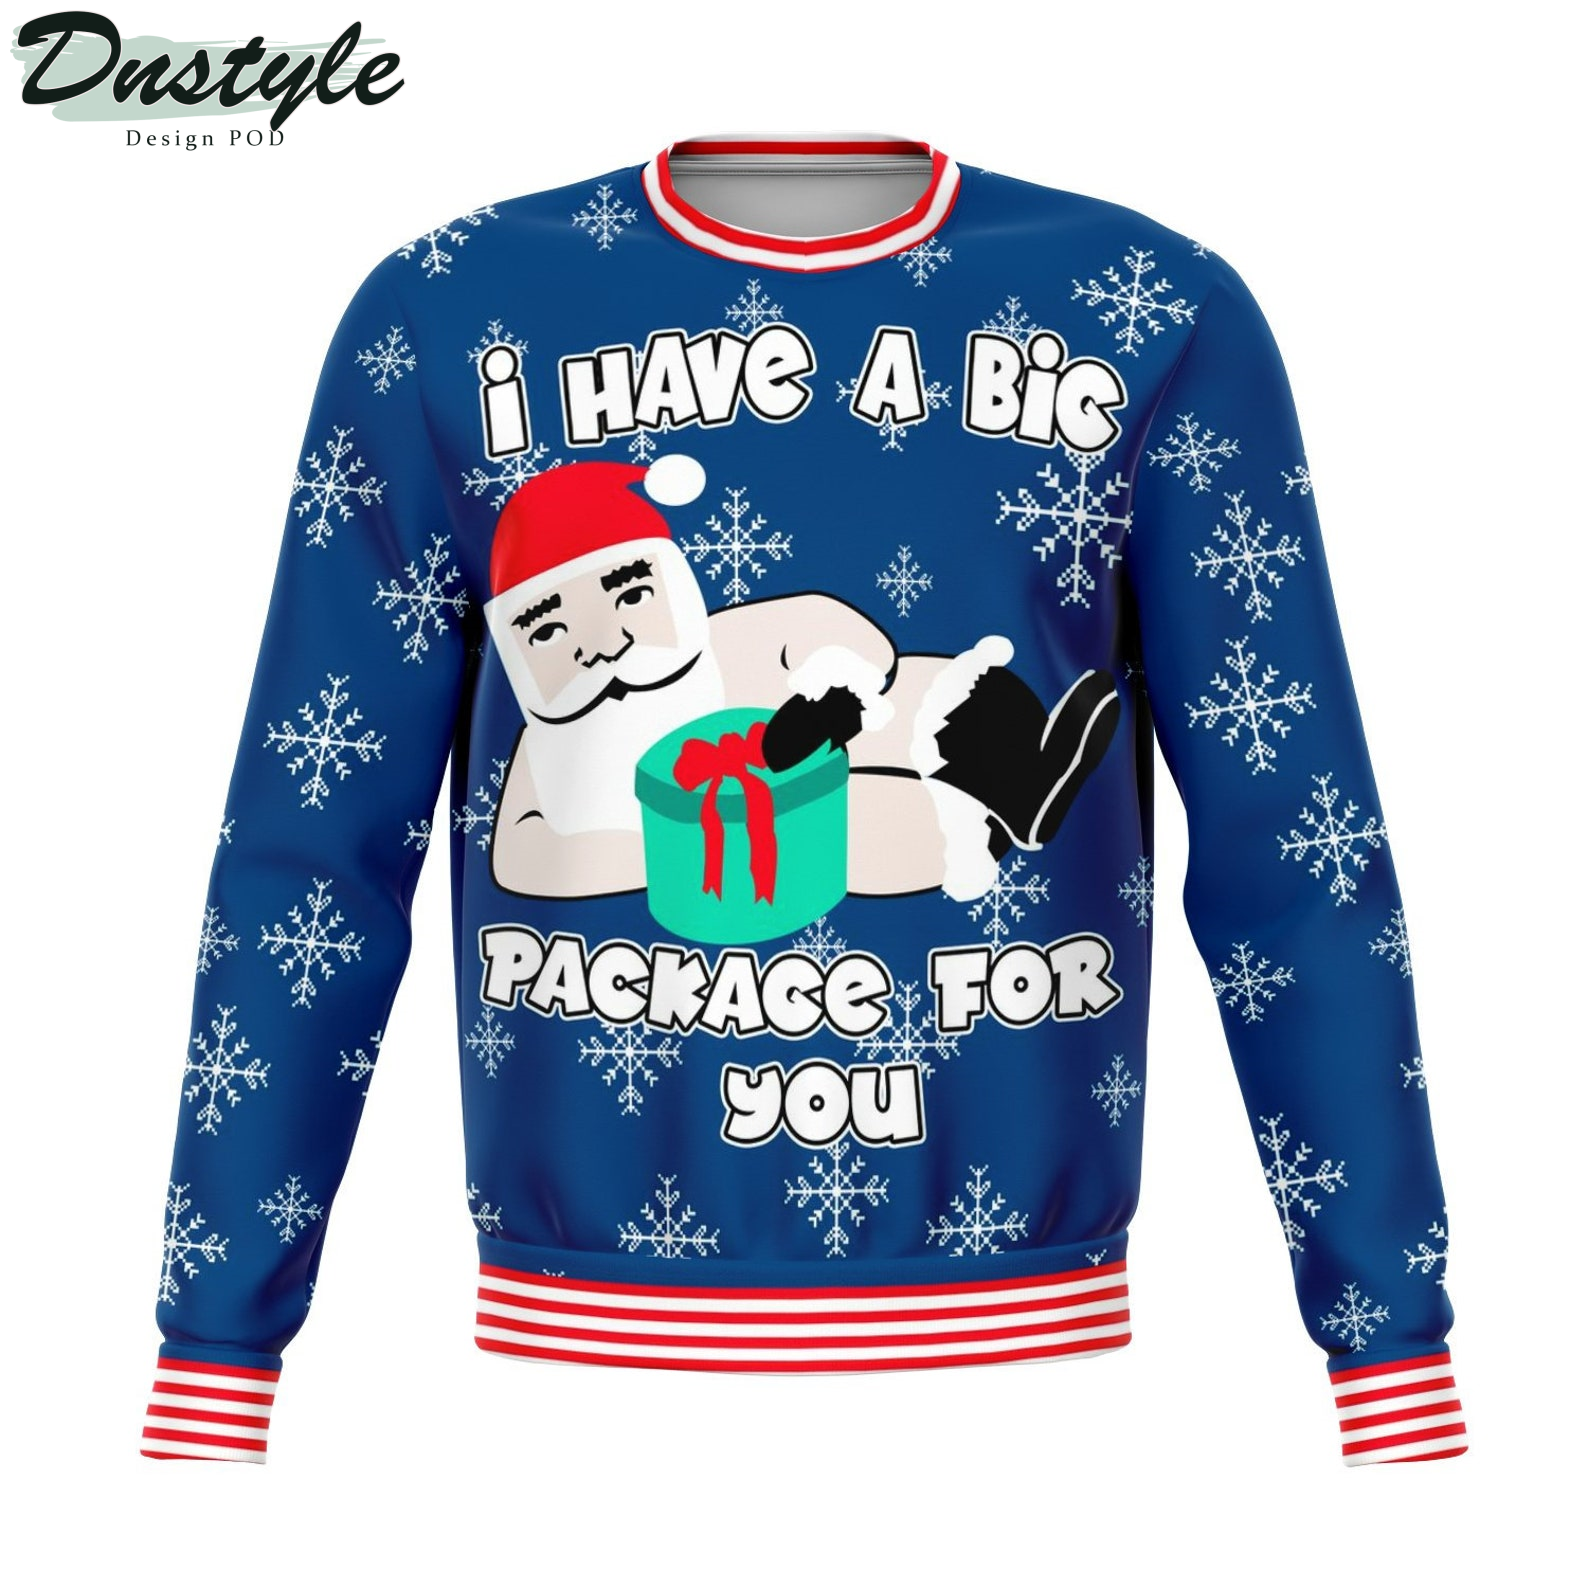 Big Package For You 2022 Ugly Christmas Sweater